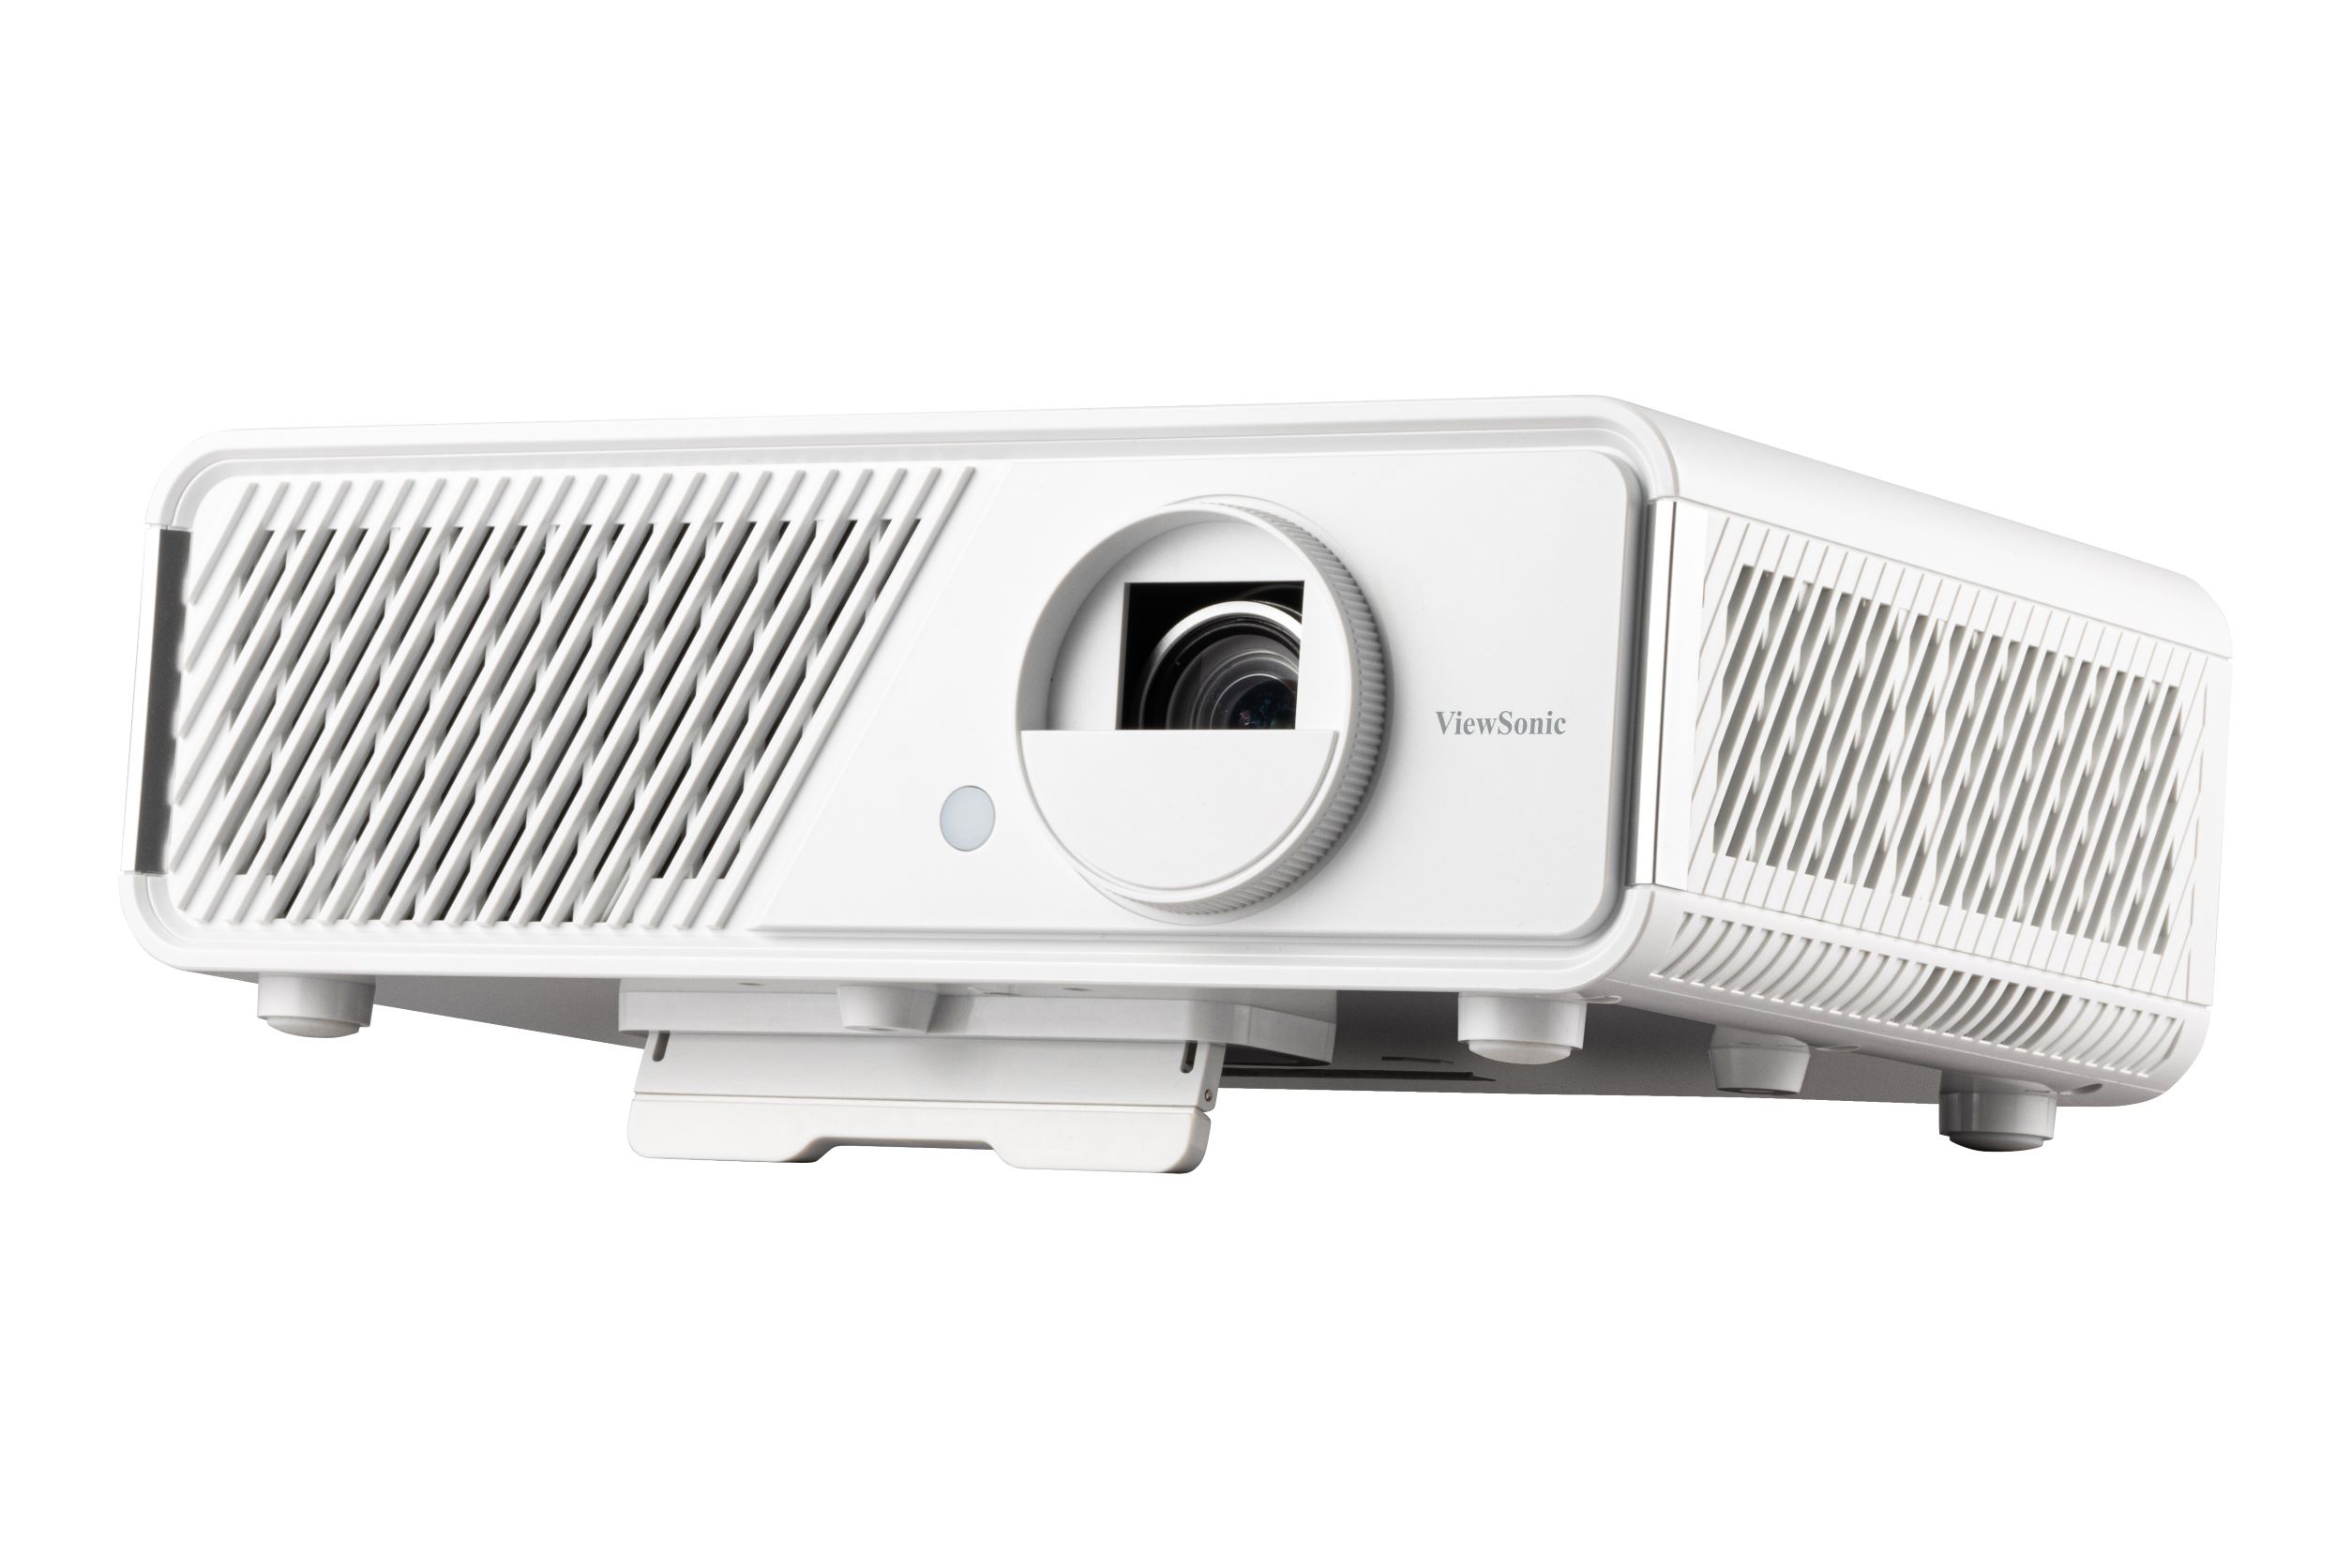 ViewSonic X1 Smart LED Home Projector